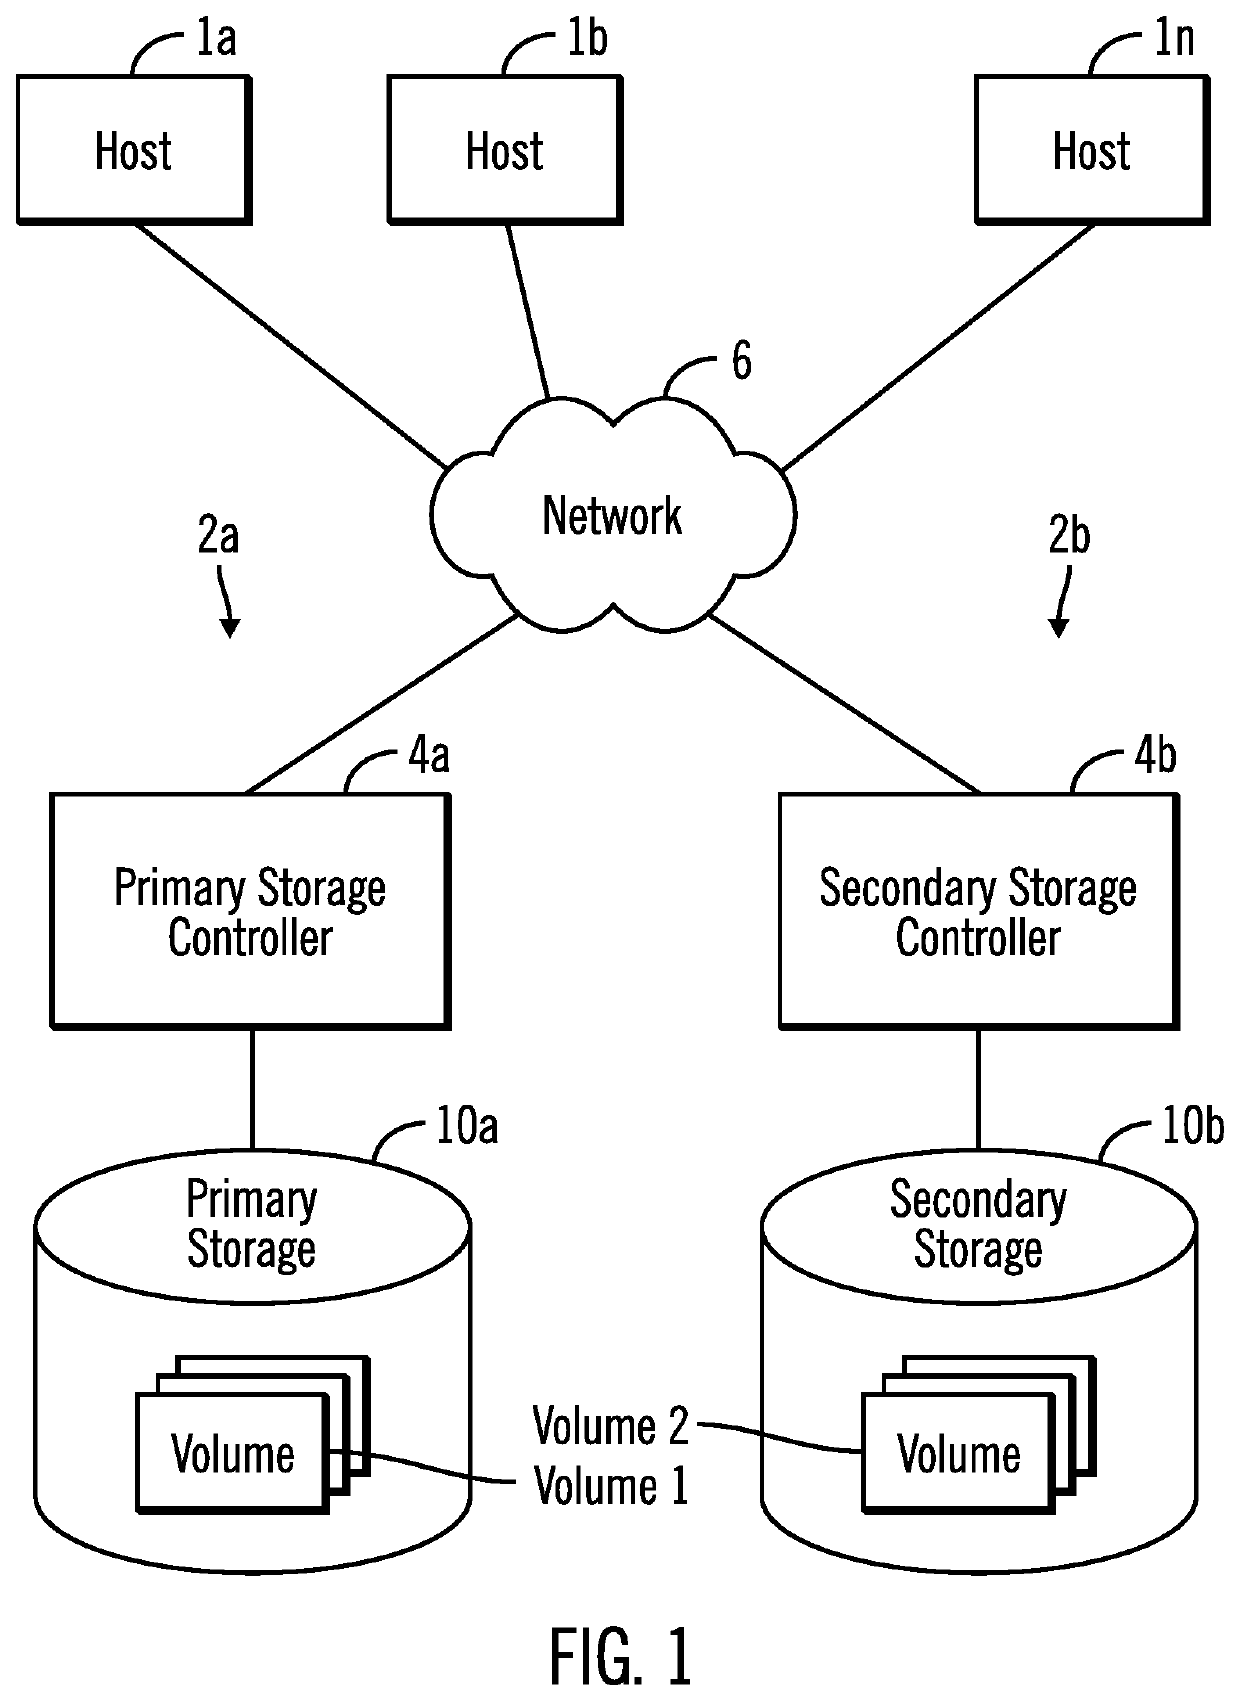 Power level management in a data storage system